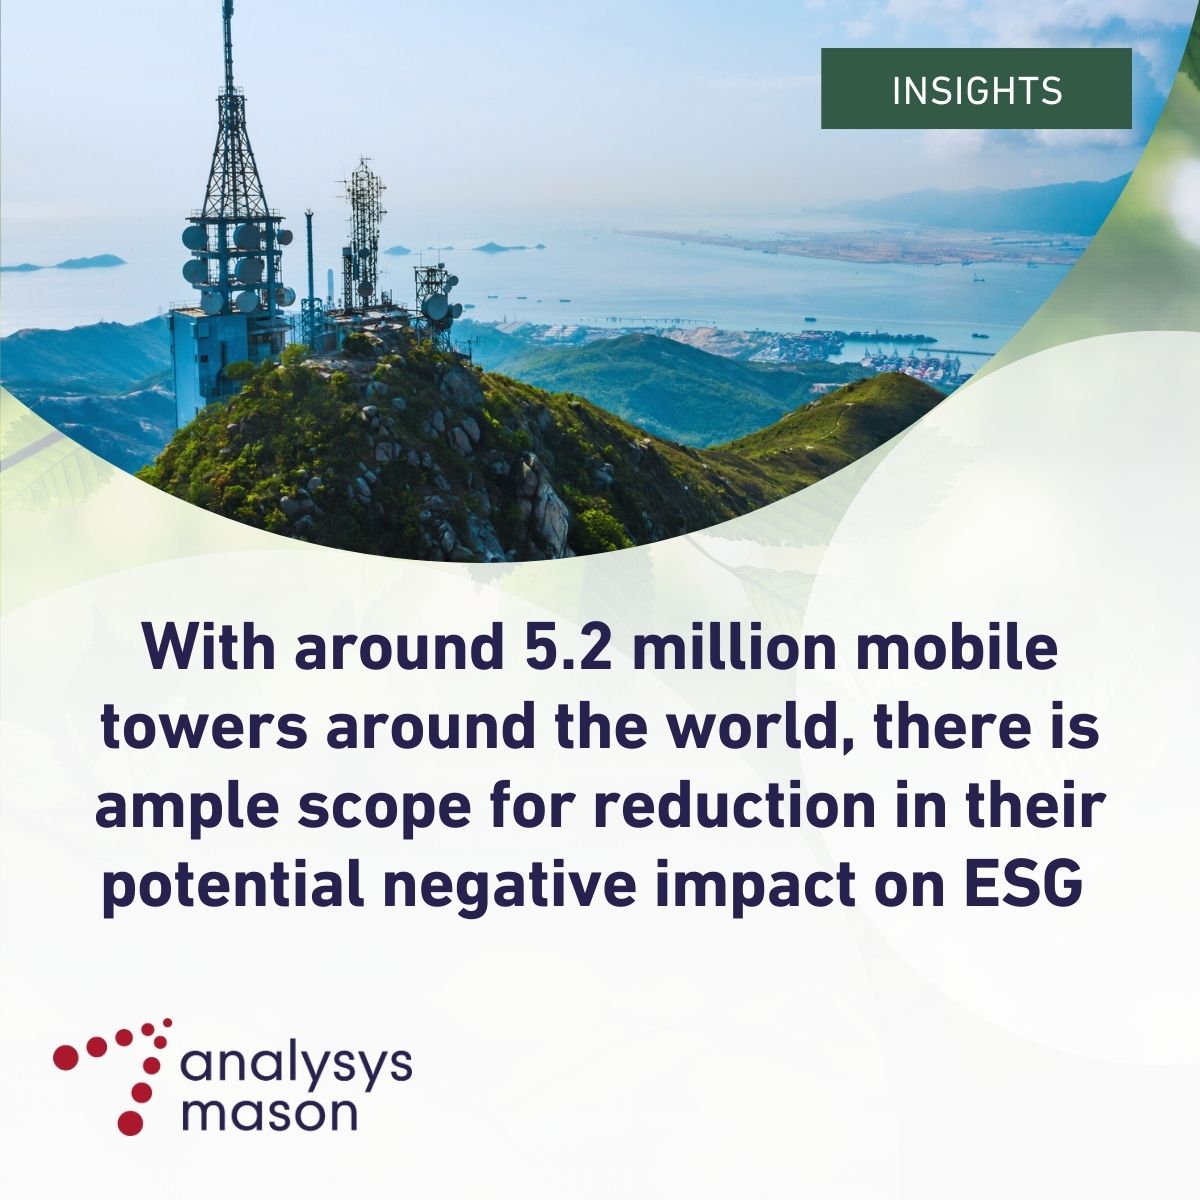 We recommend that every towerco should create a coherent ESG framework. Learn more about how we help organisations find sustainable paths for growth: bit.ly/3WBoWlm #Sustainability #ESG #GreenTech